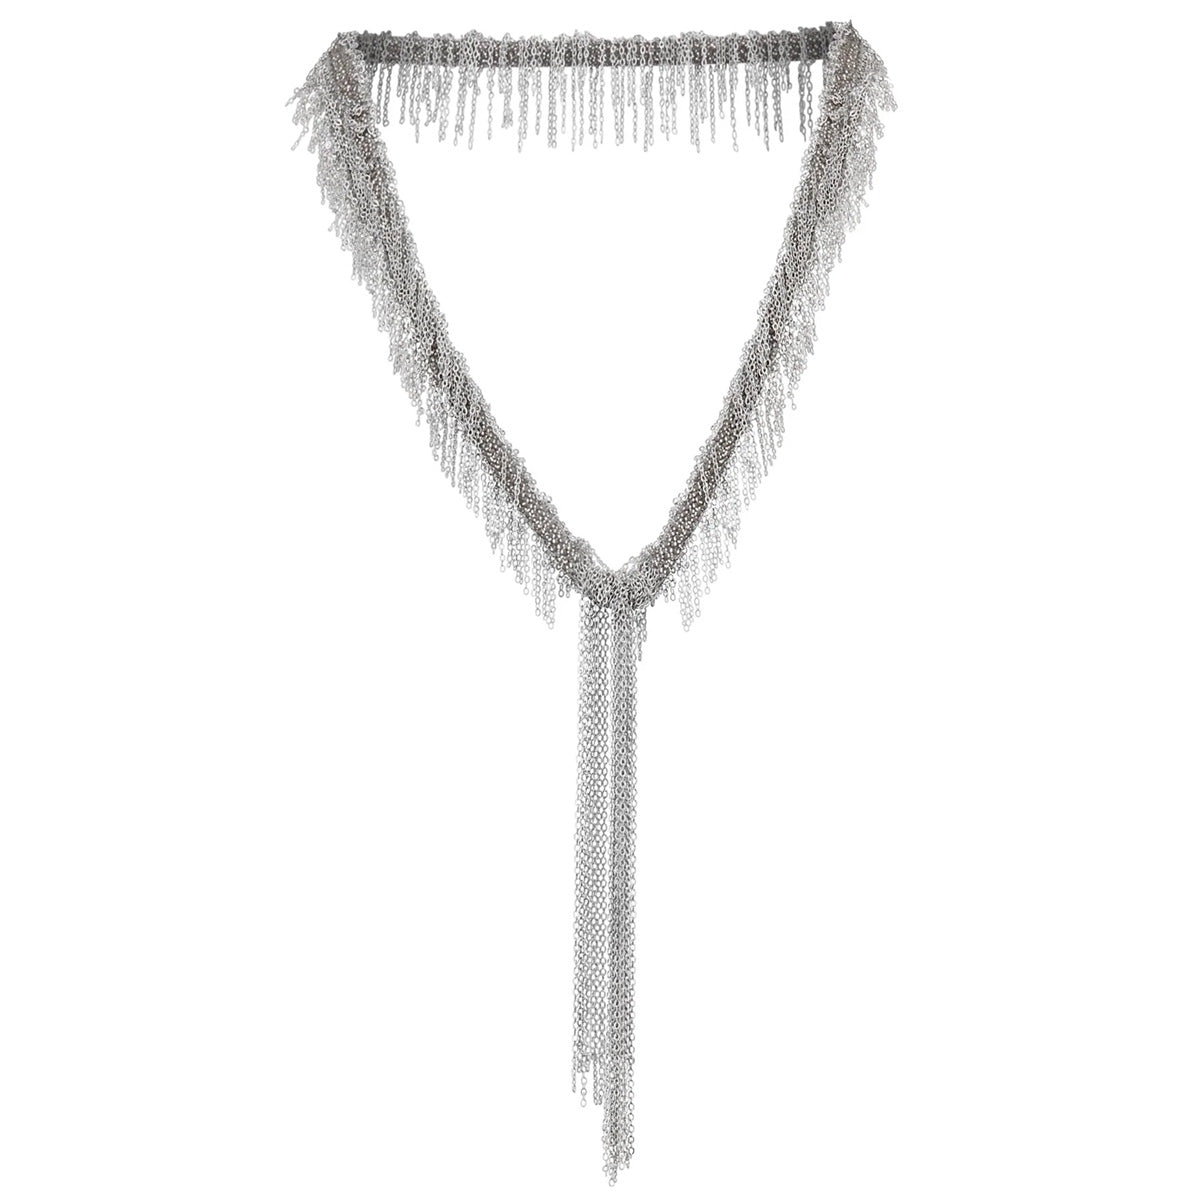 White Bronze &amp; Grey Silk Woven &quot;Fringe&quot; Necklace with Chain Drop - Peridot Fine Jewelry - Marie Laure Chamorel